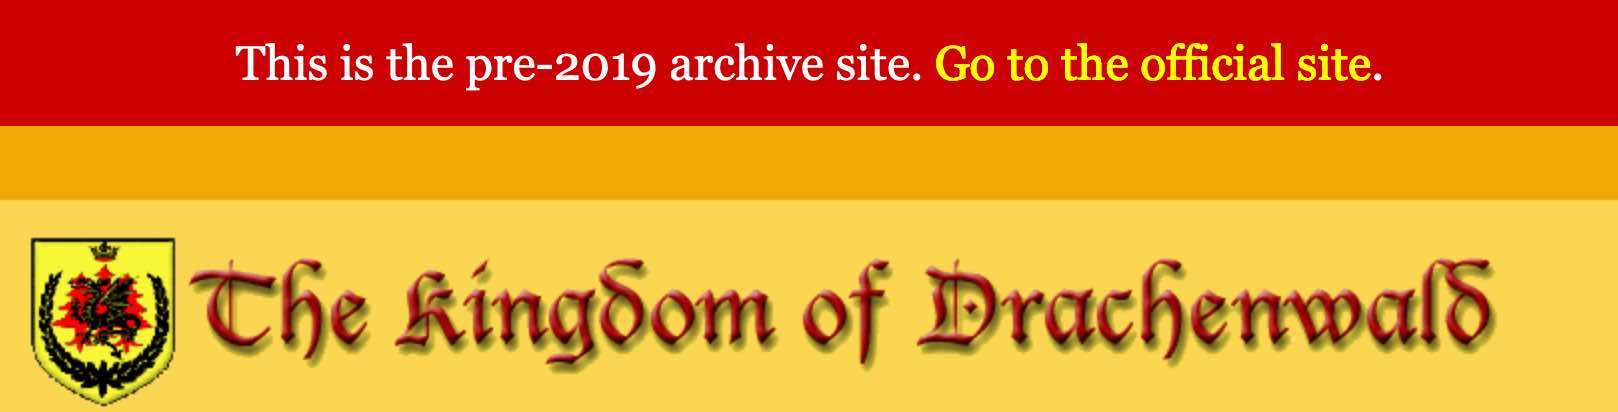 Archive site banner screenshot